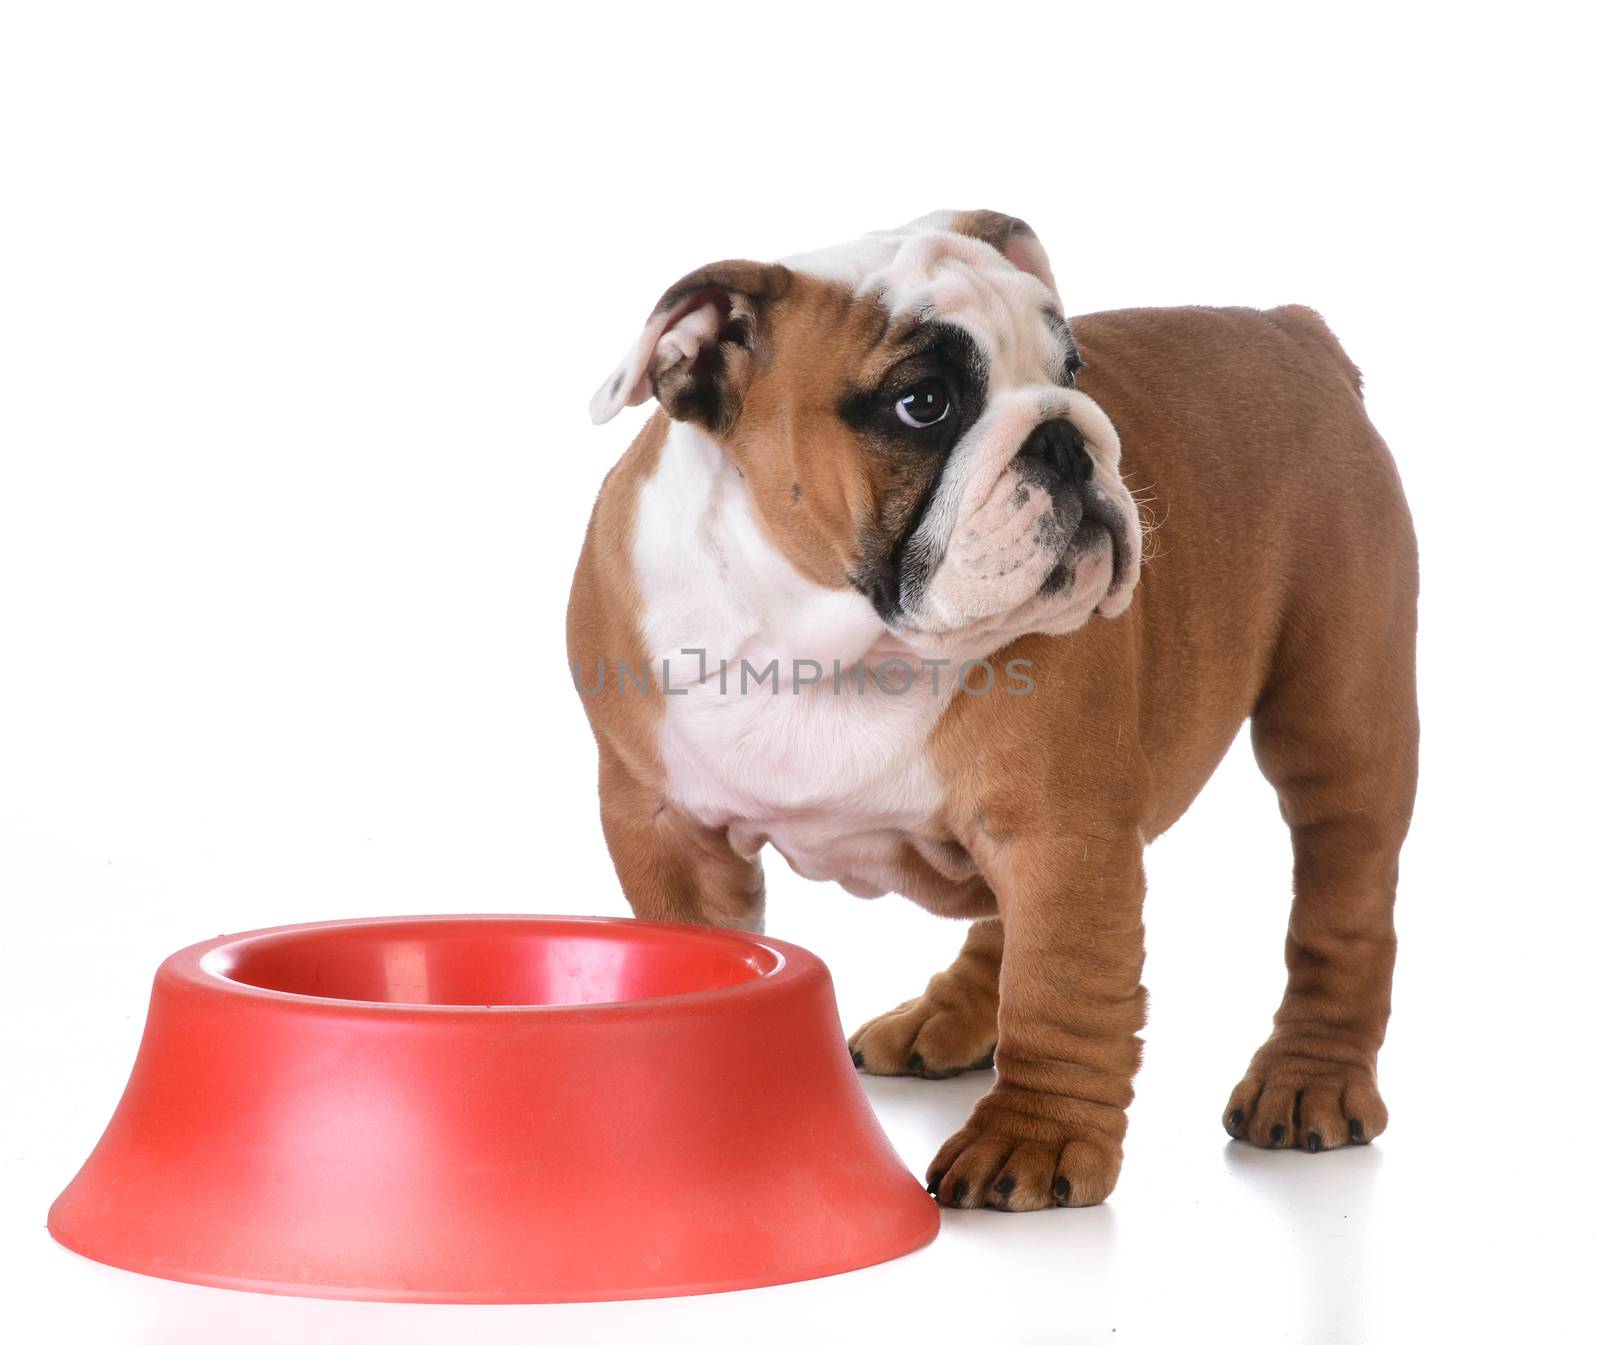 feeding the dog - bulldog puppy standing at dog bowl waiting to be fed